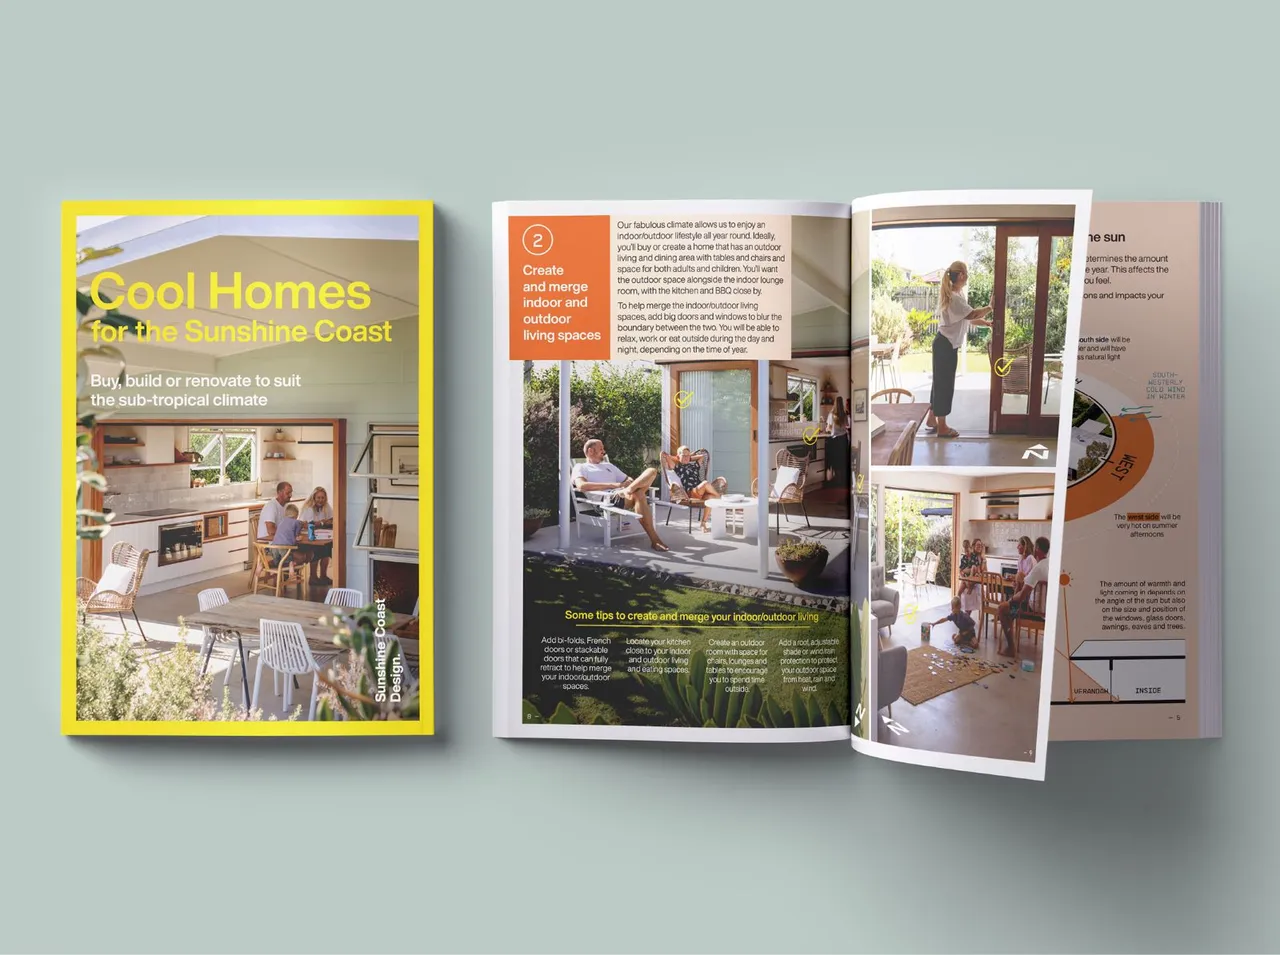 Cool Homes booklet